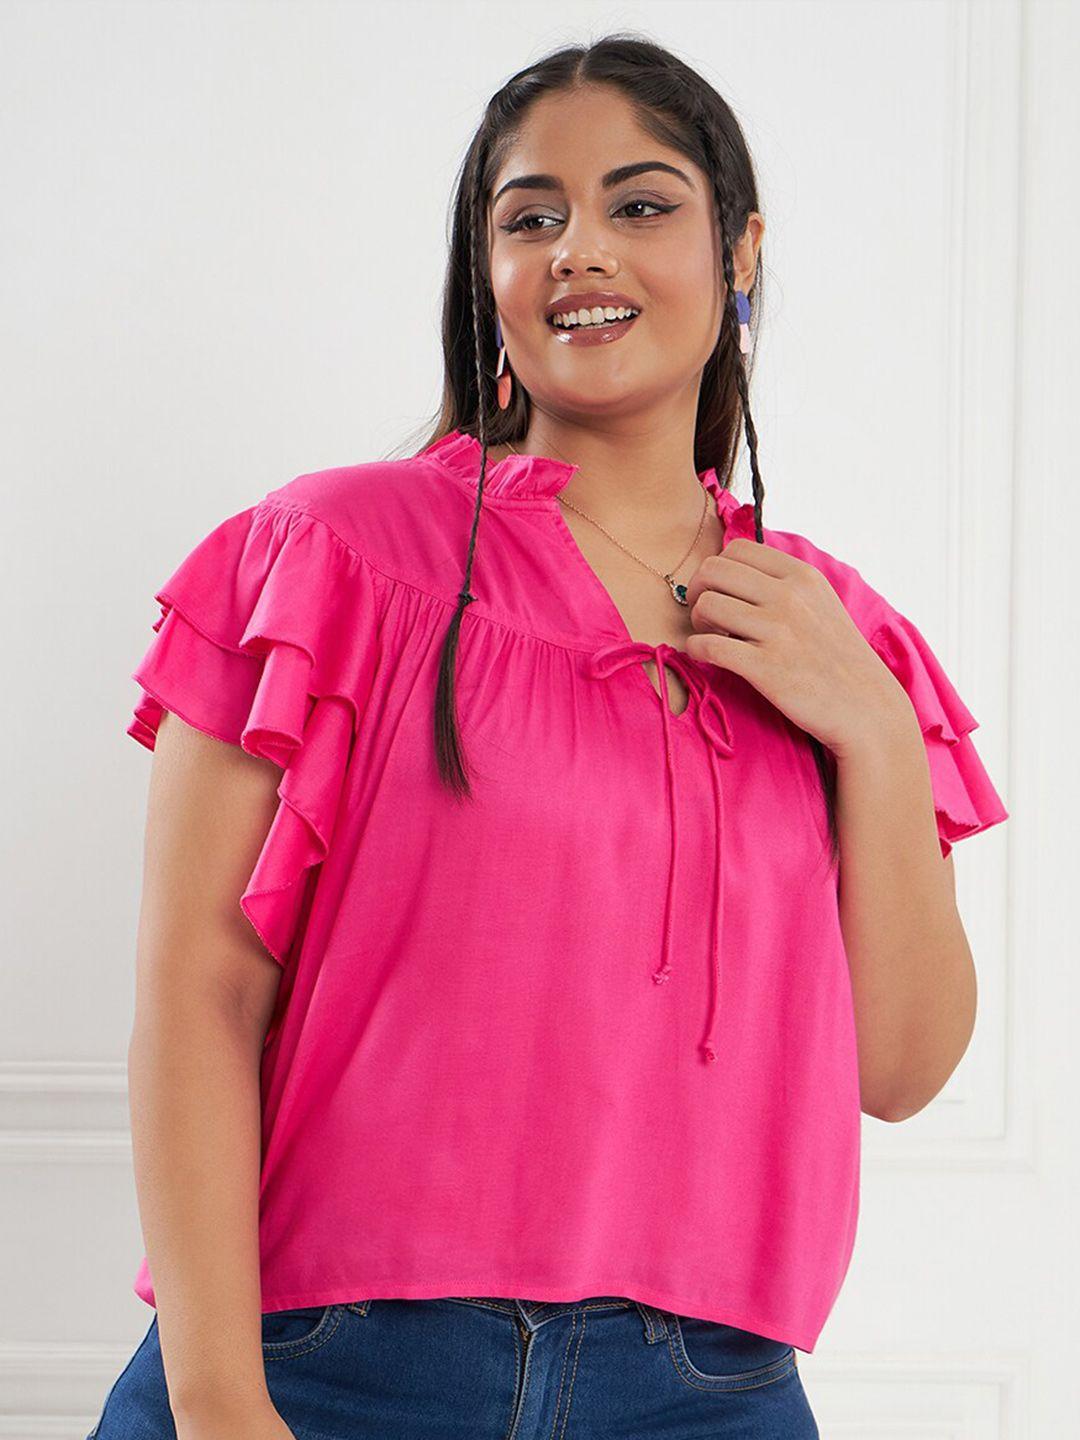 curve-by-kassually-fuchsia-mandarin-collar-flutter-sleeves-tie-ups-pure-cotton-top